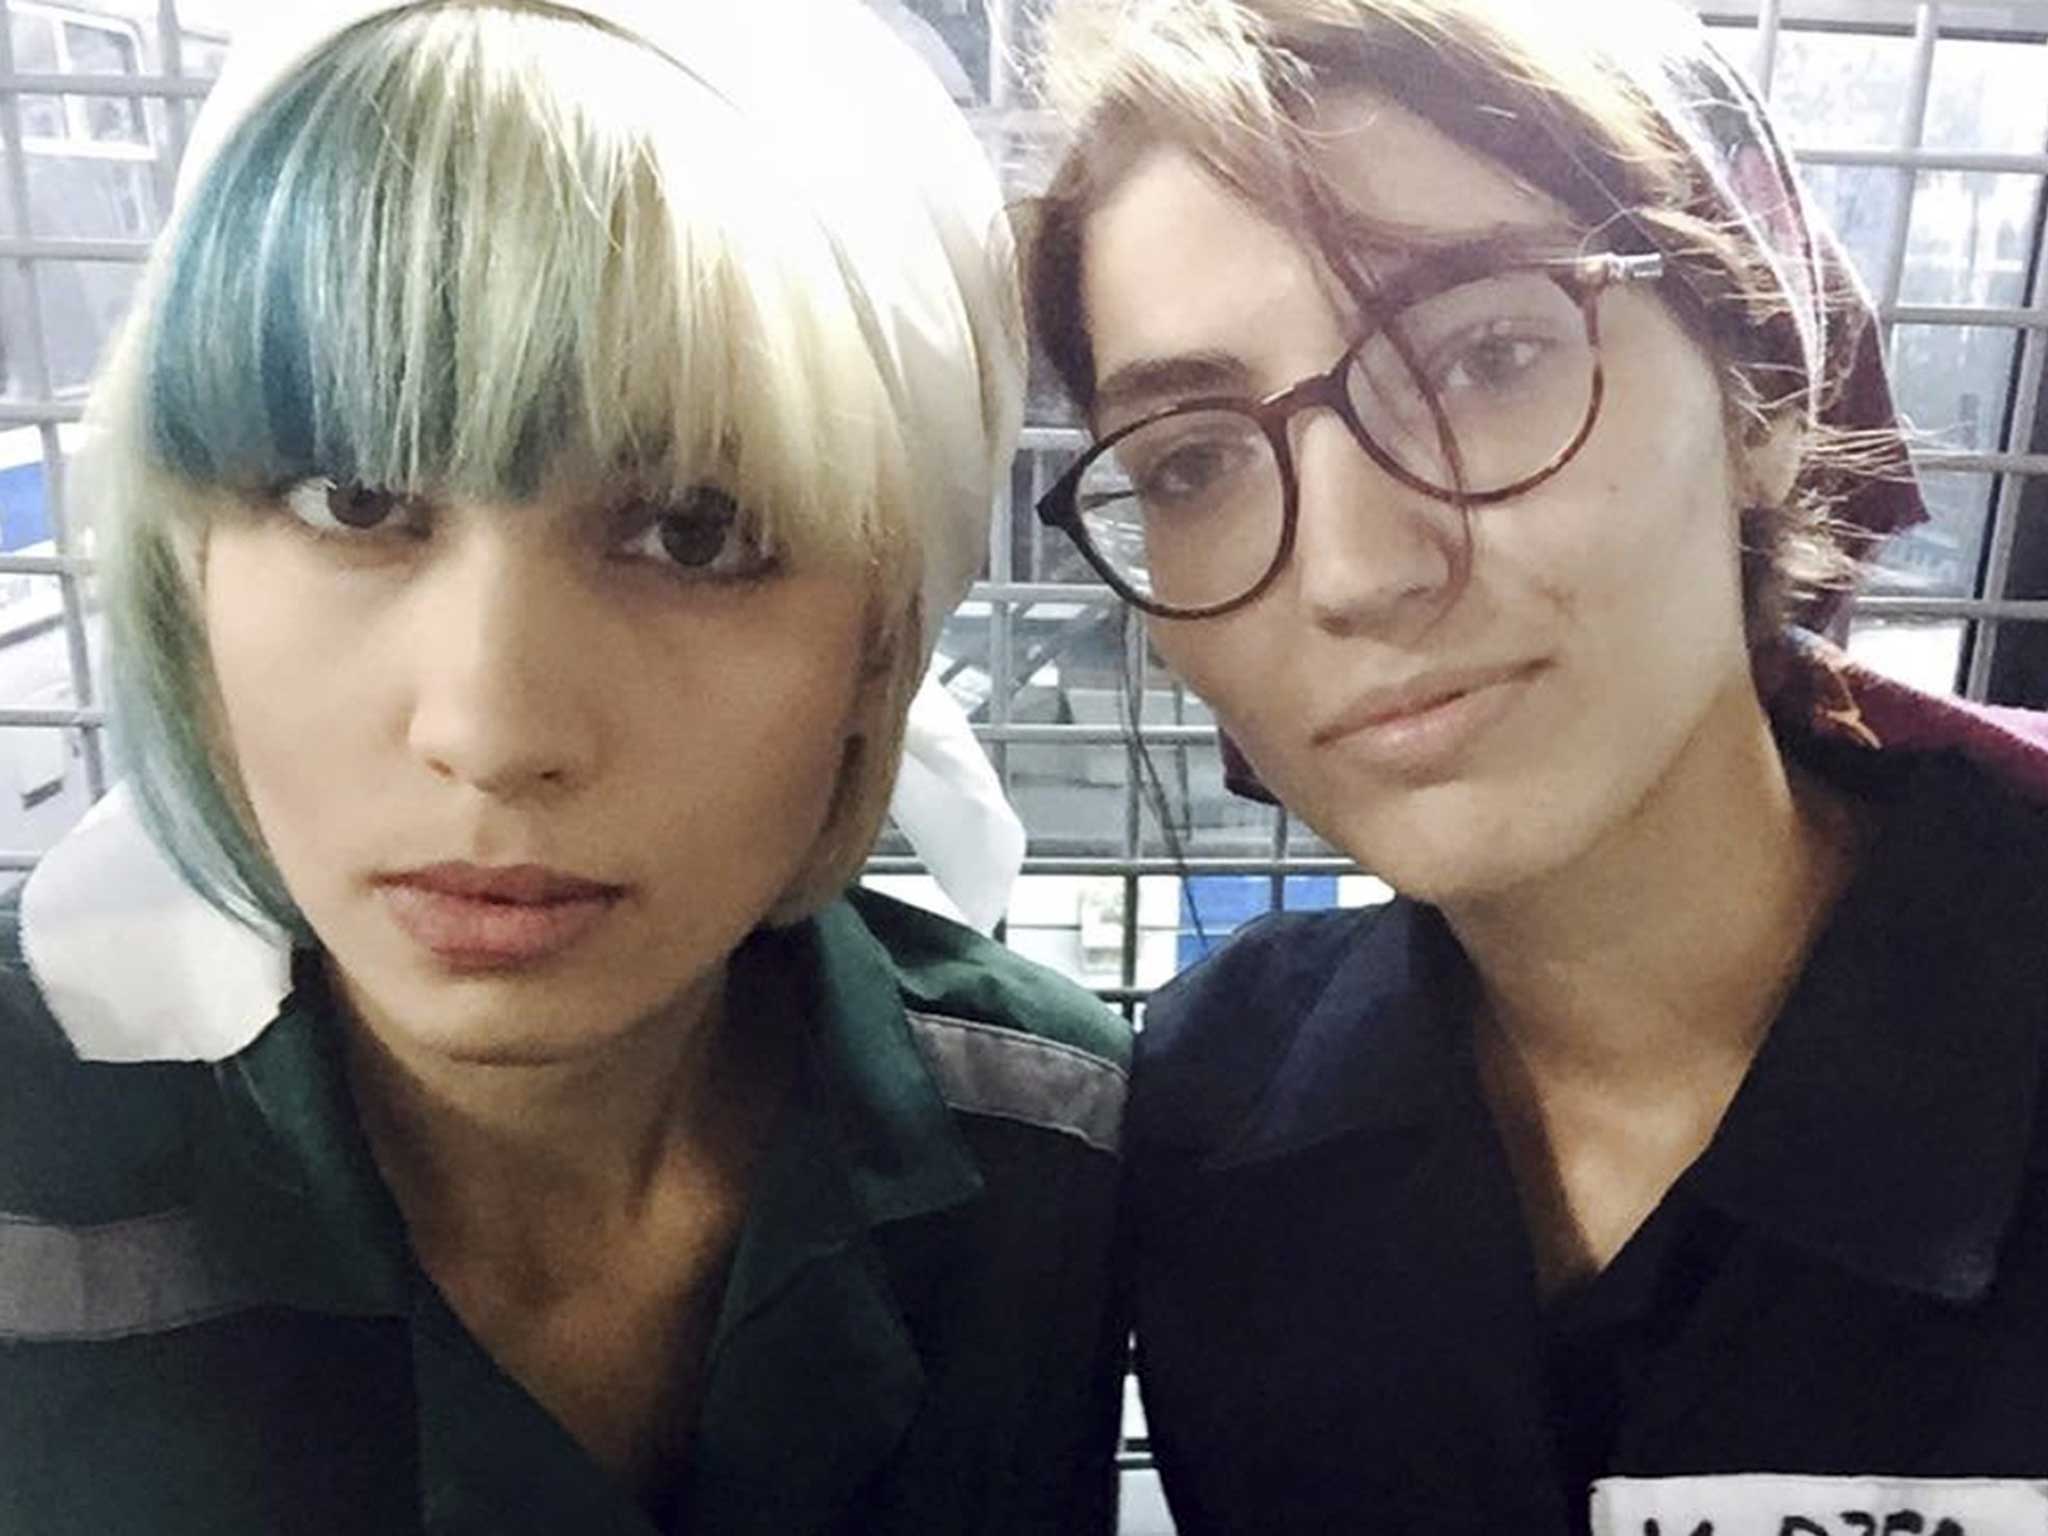 Nadezhda Tolokonnikova (left) and Maria Alyokhina (right) after being arrested earlier this month